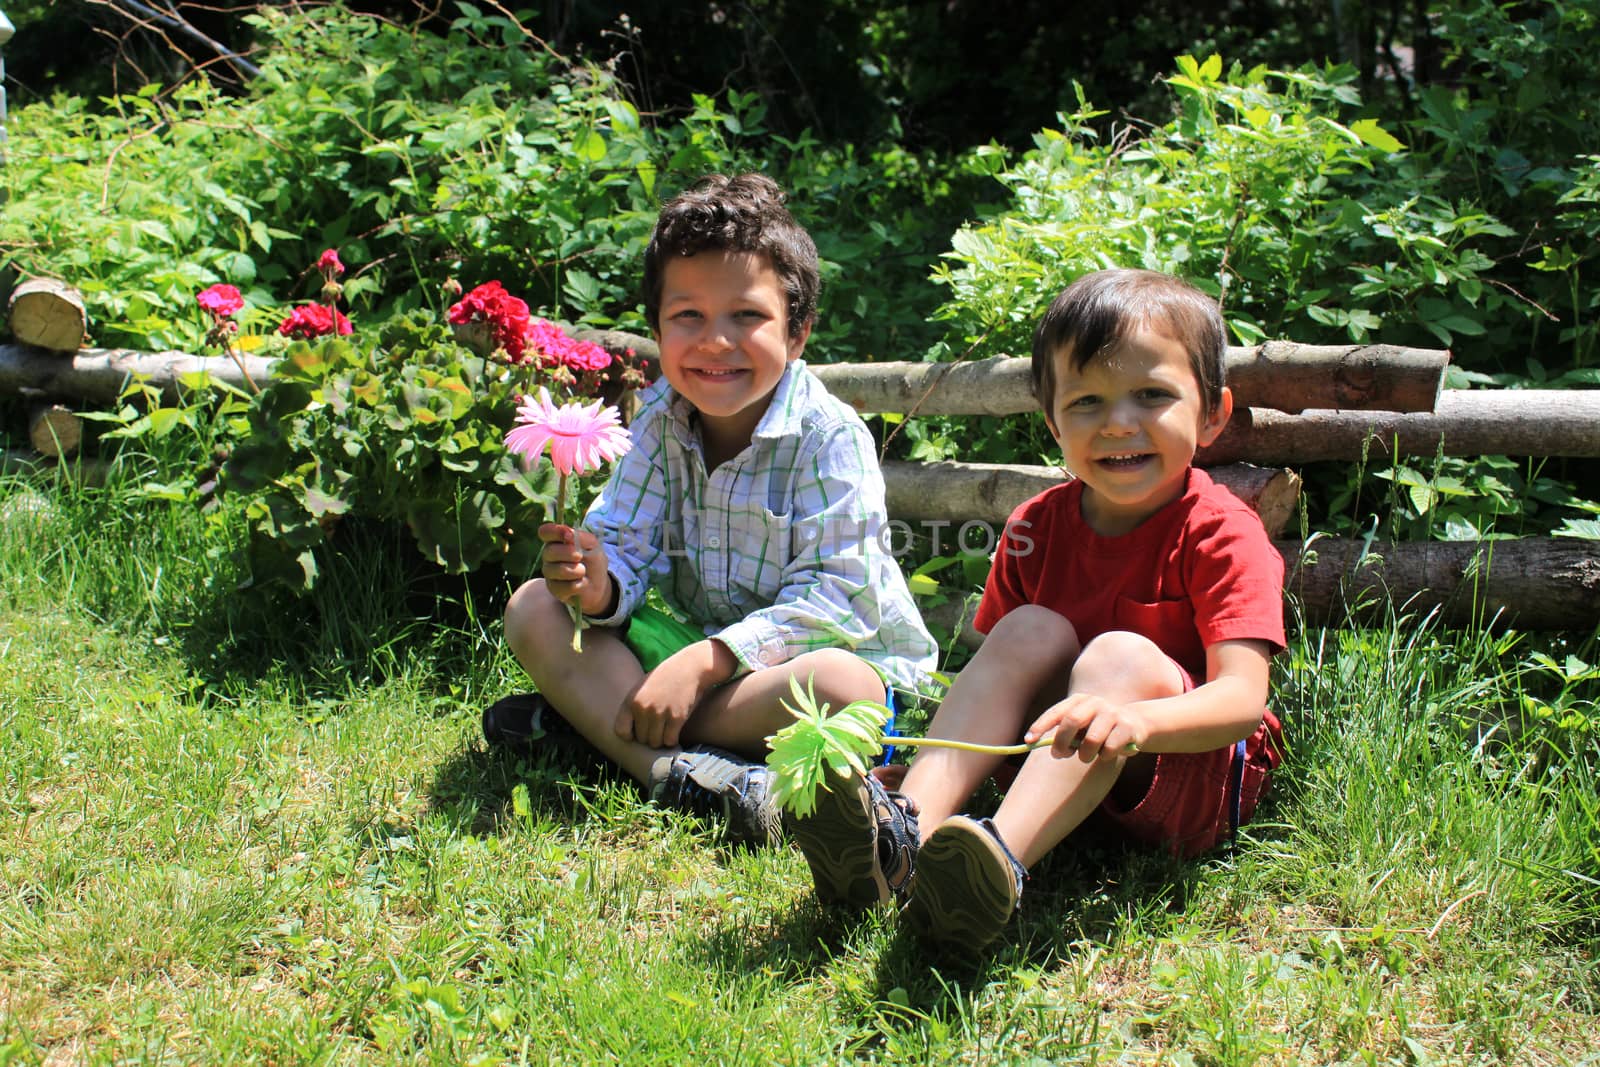 Two little boys who could be brothers sitting in the garden holding flowers and smiling